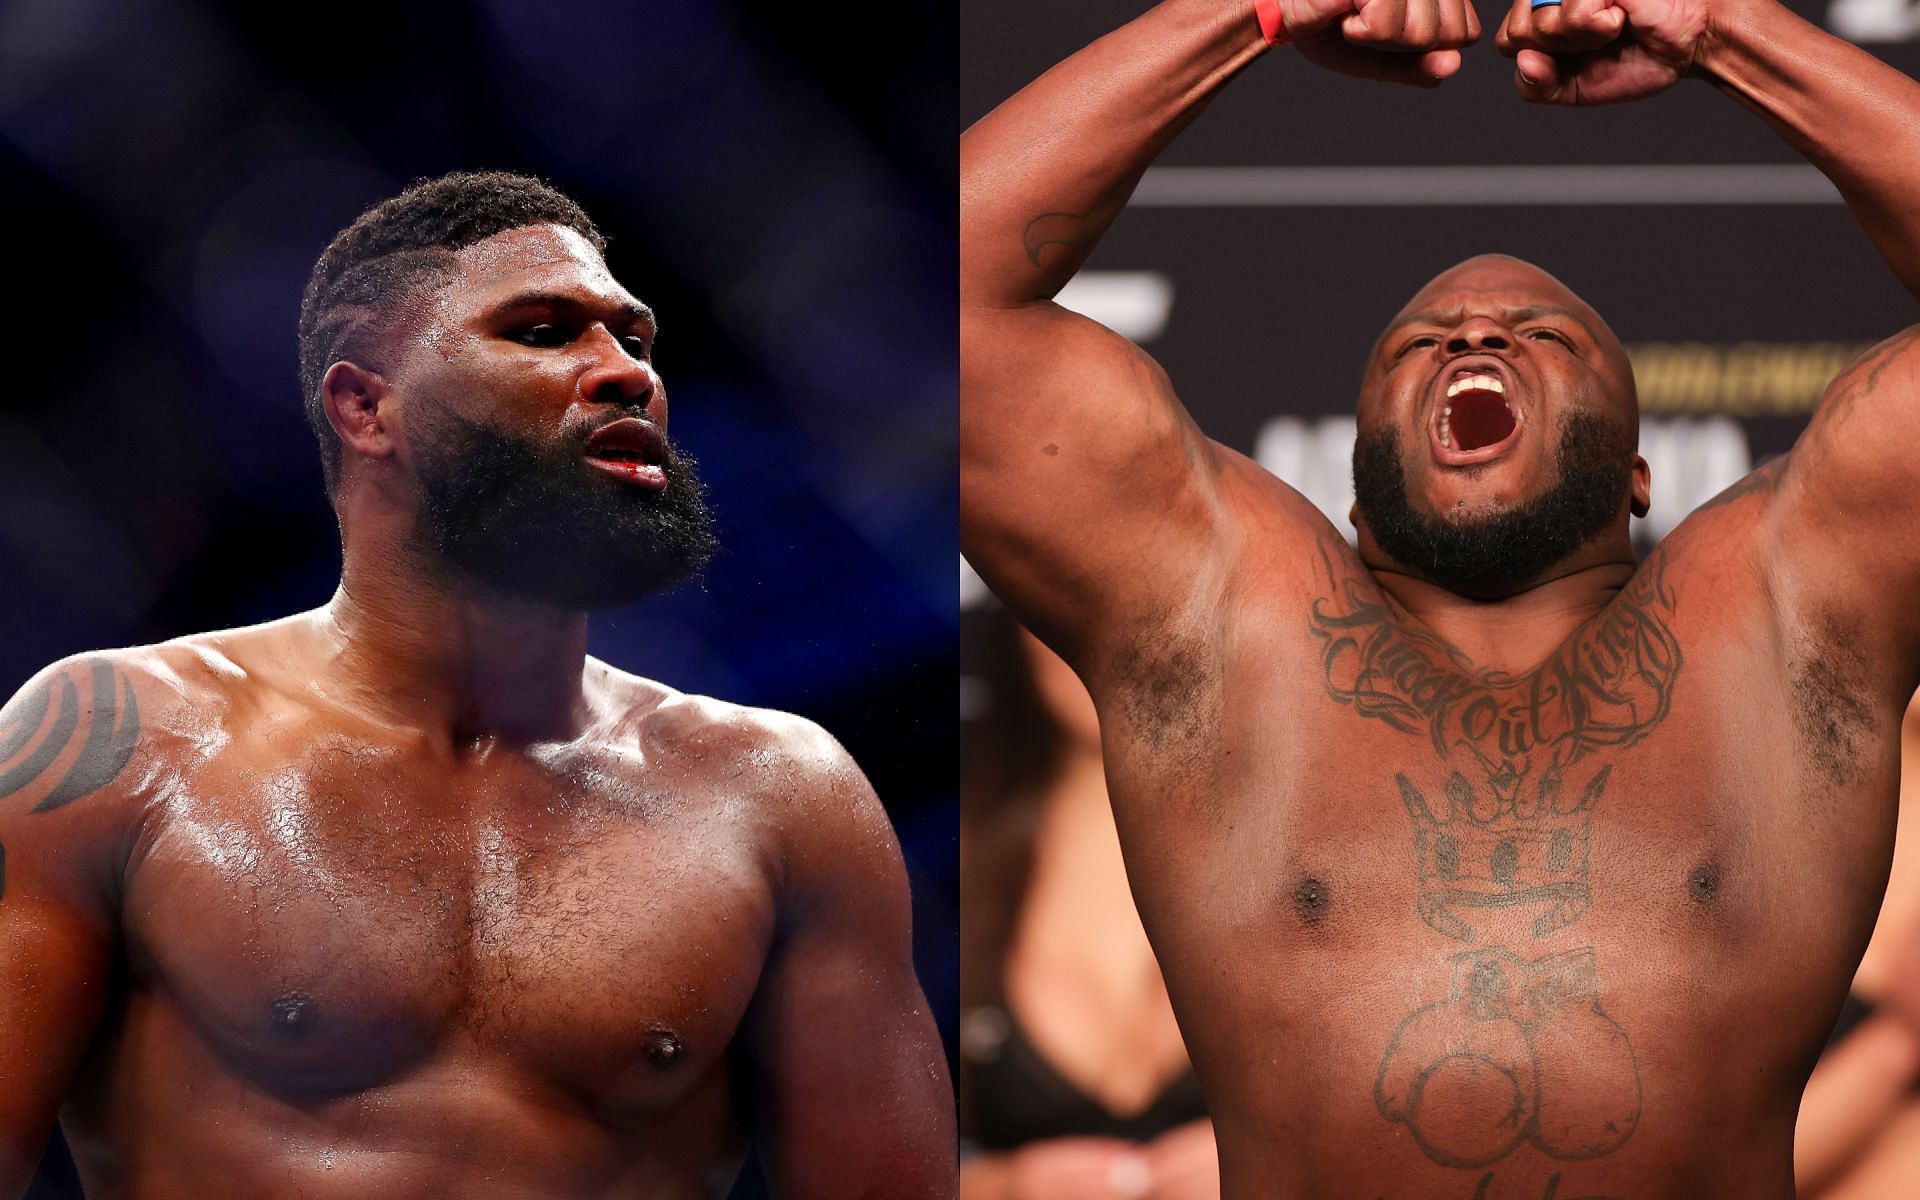 Curtis Blaydes (left) and Derrick Lewis (right) (Images via Getty)